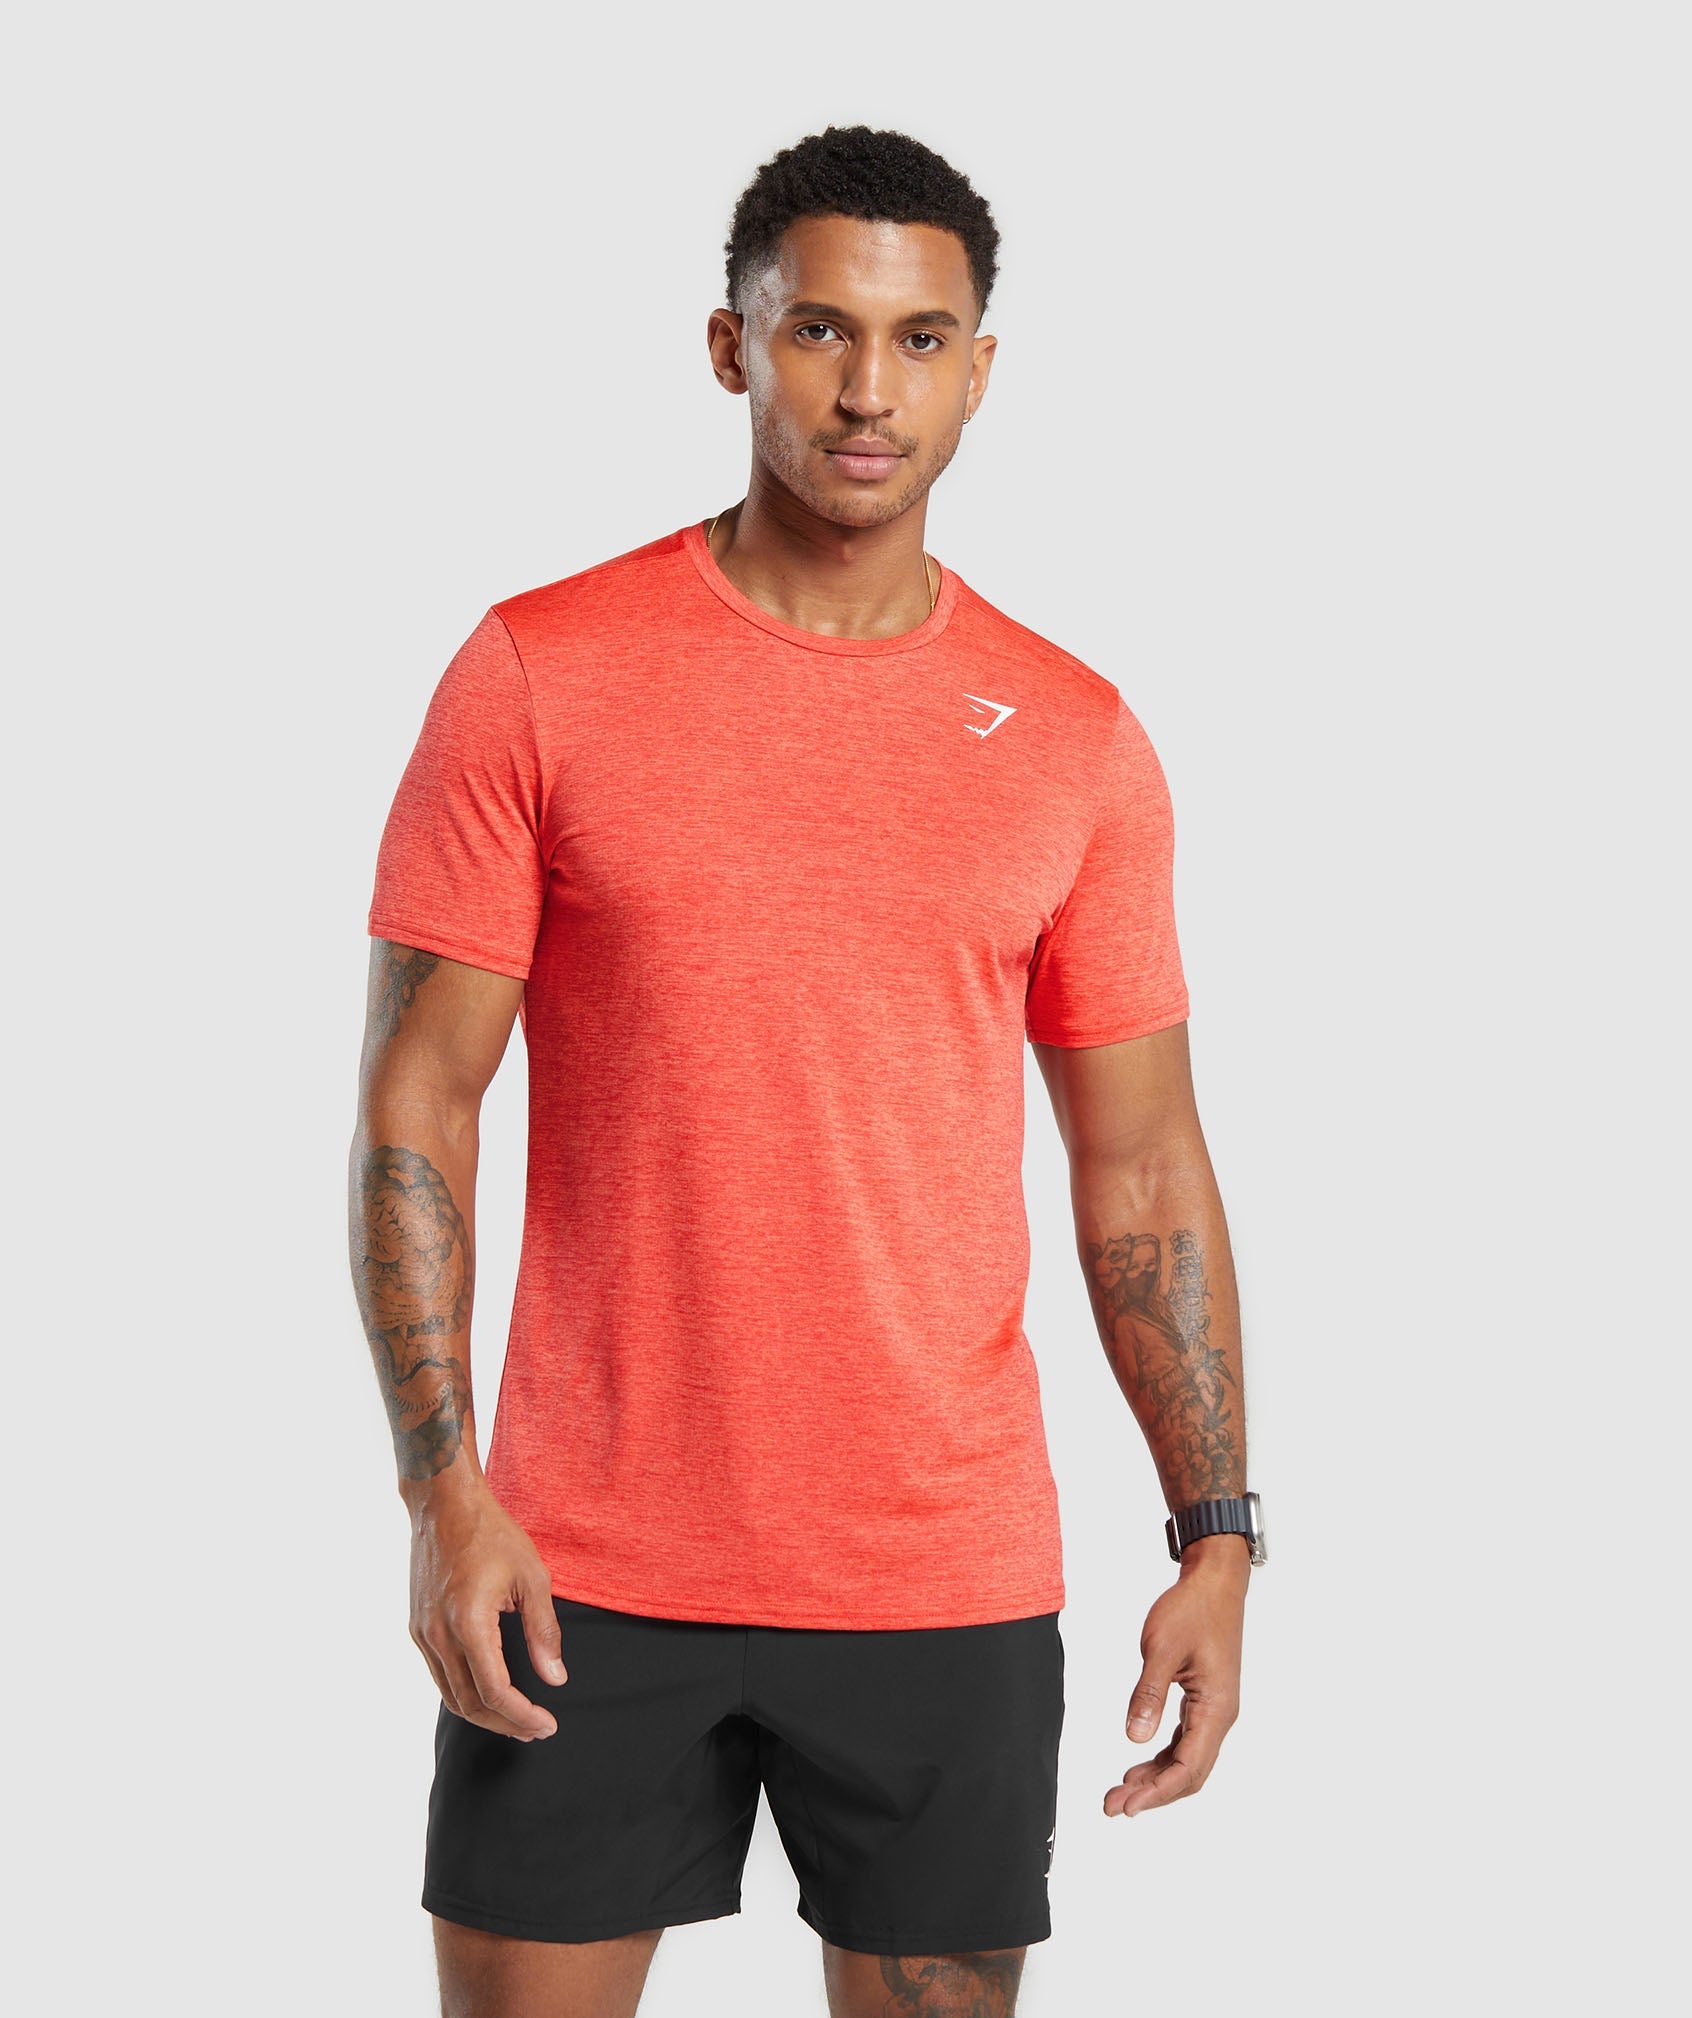 Arrival Marl T-Shirt in Pow Red/Wannabe Orange Marl